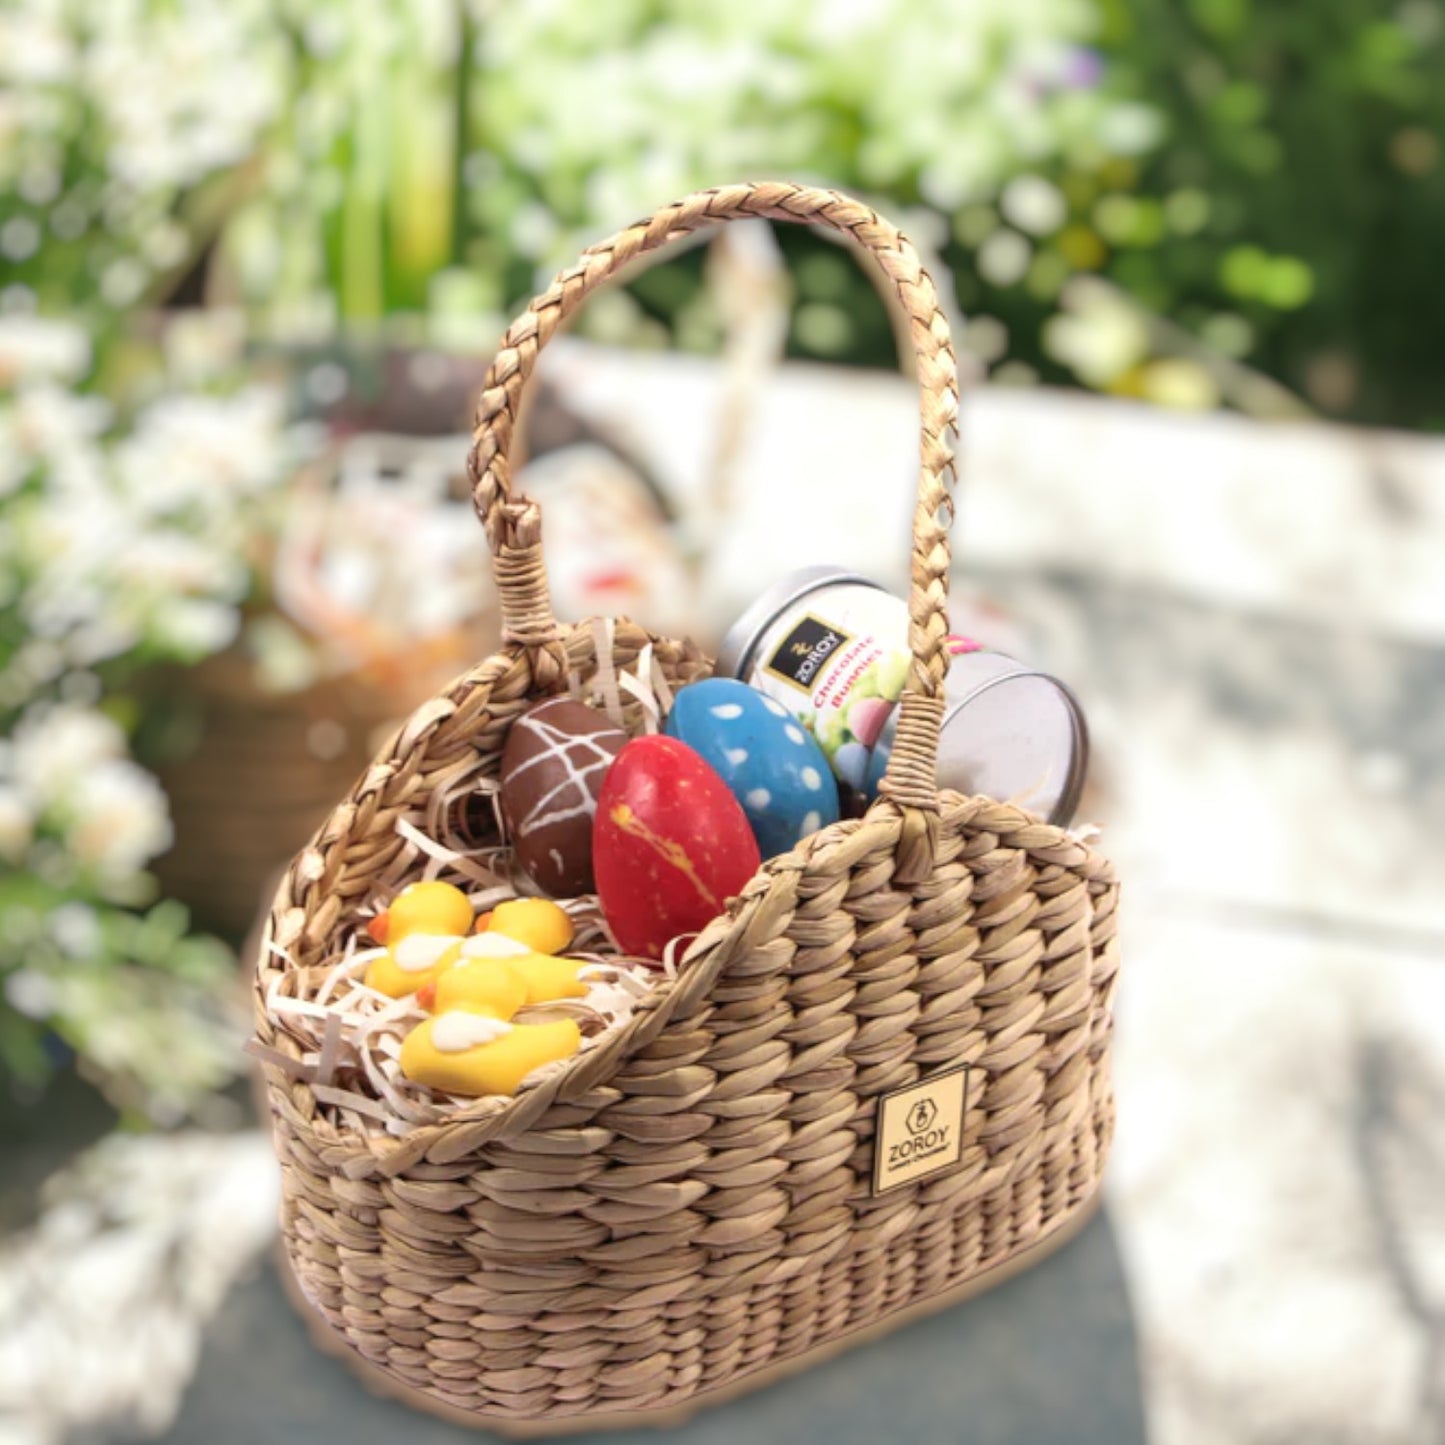 ZOROY Chocolate Natural Easter Basket of Happiness